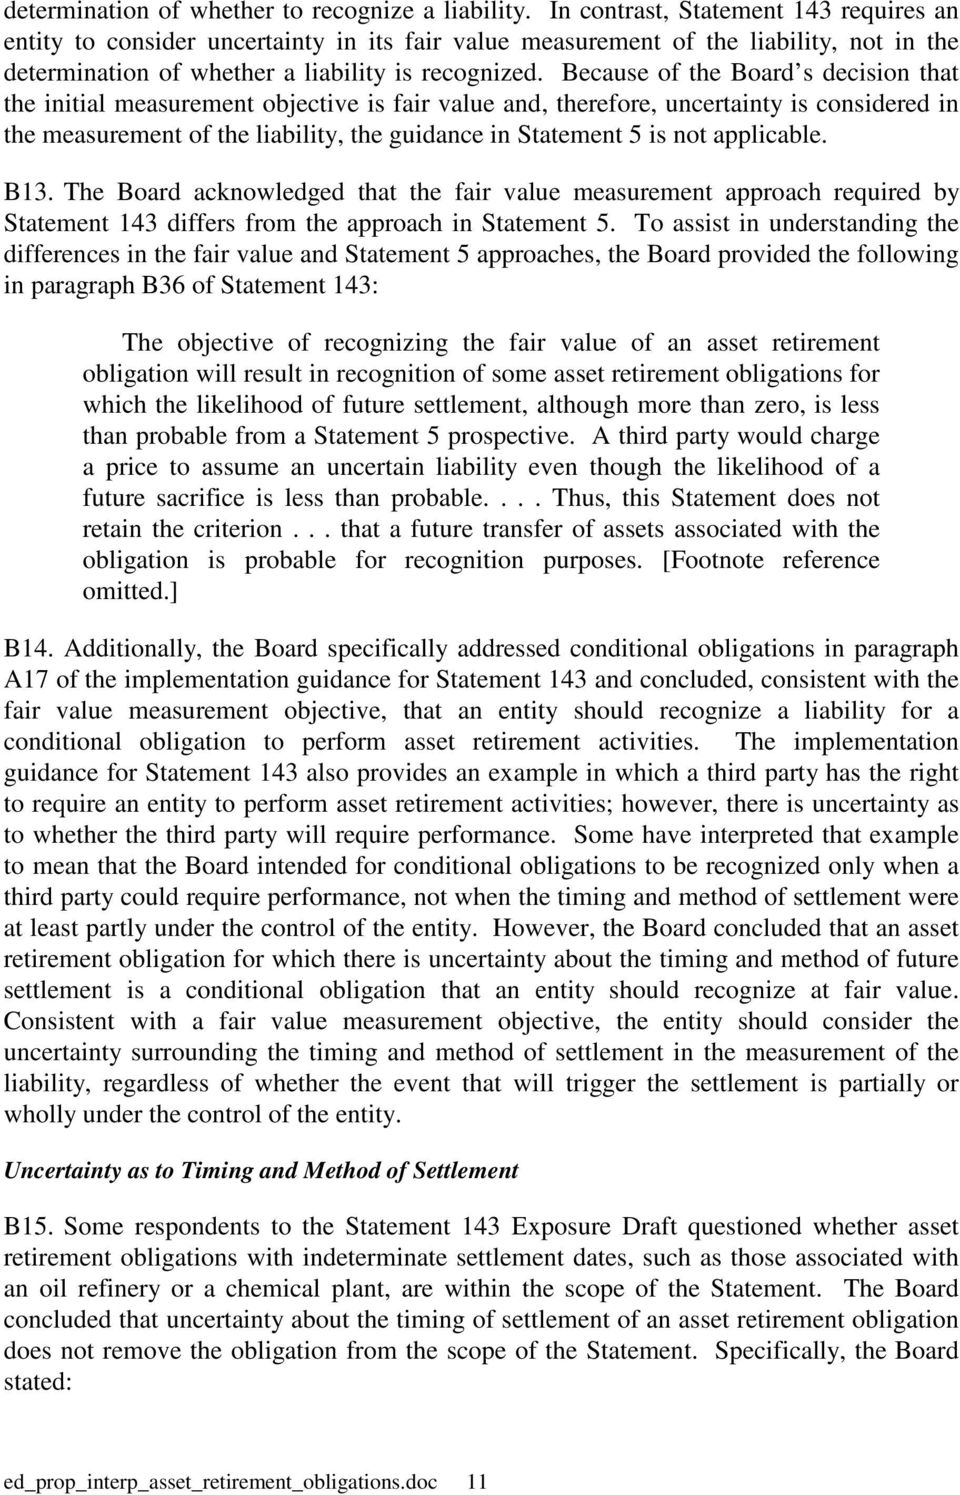 Because of the Board s decision that the initial measurement objective is fair value and, therefore, uncertainty is considered in the measurement of the liability, the guidance in Statement 5 is not